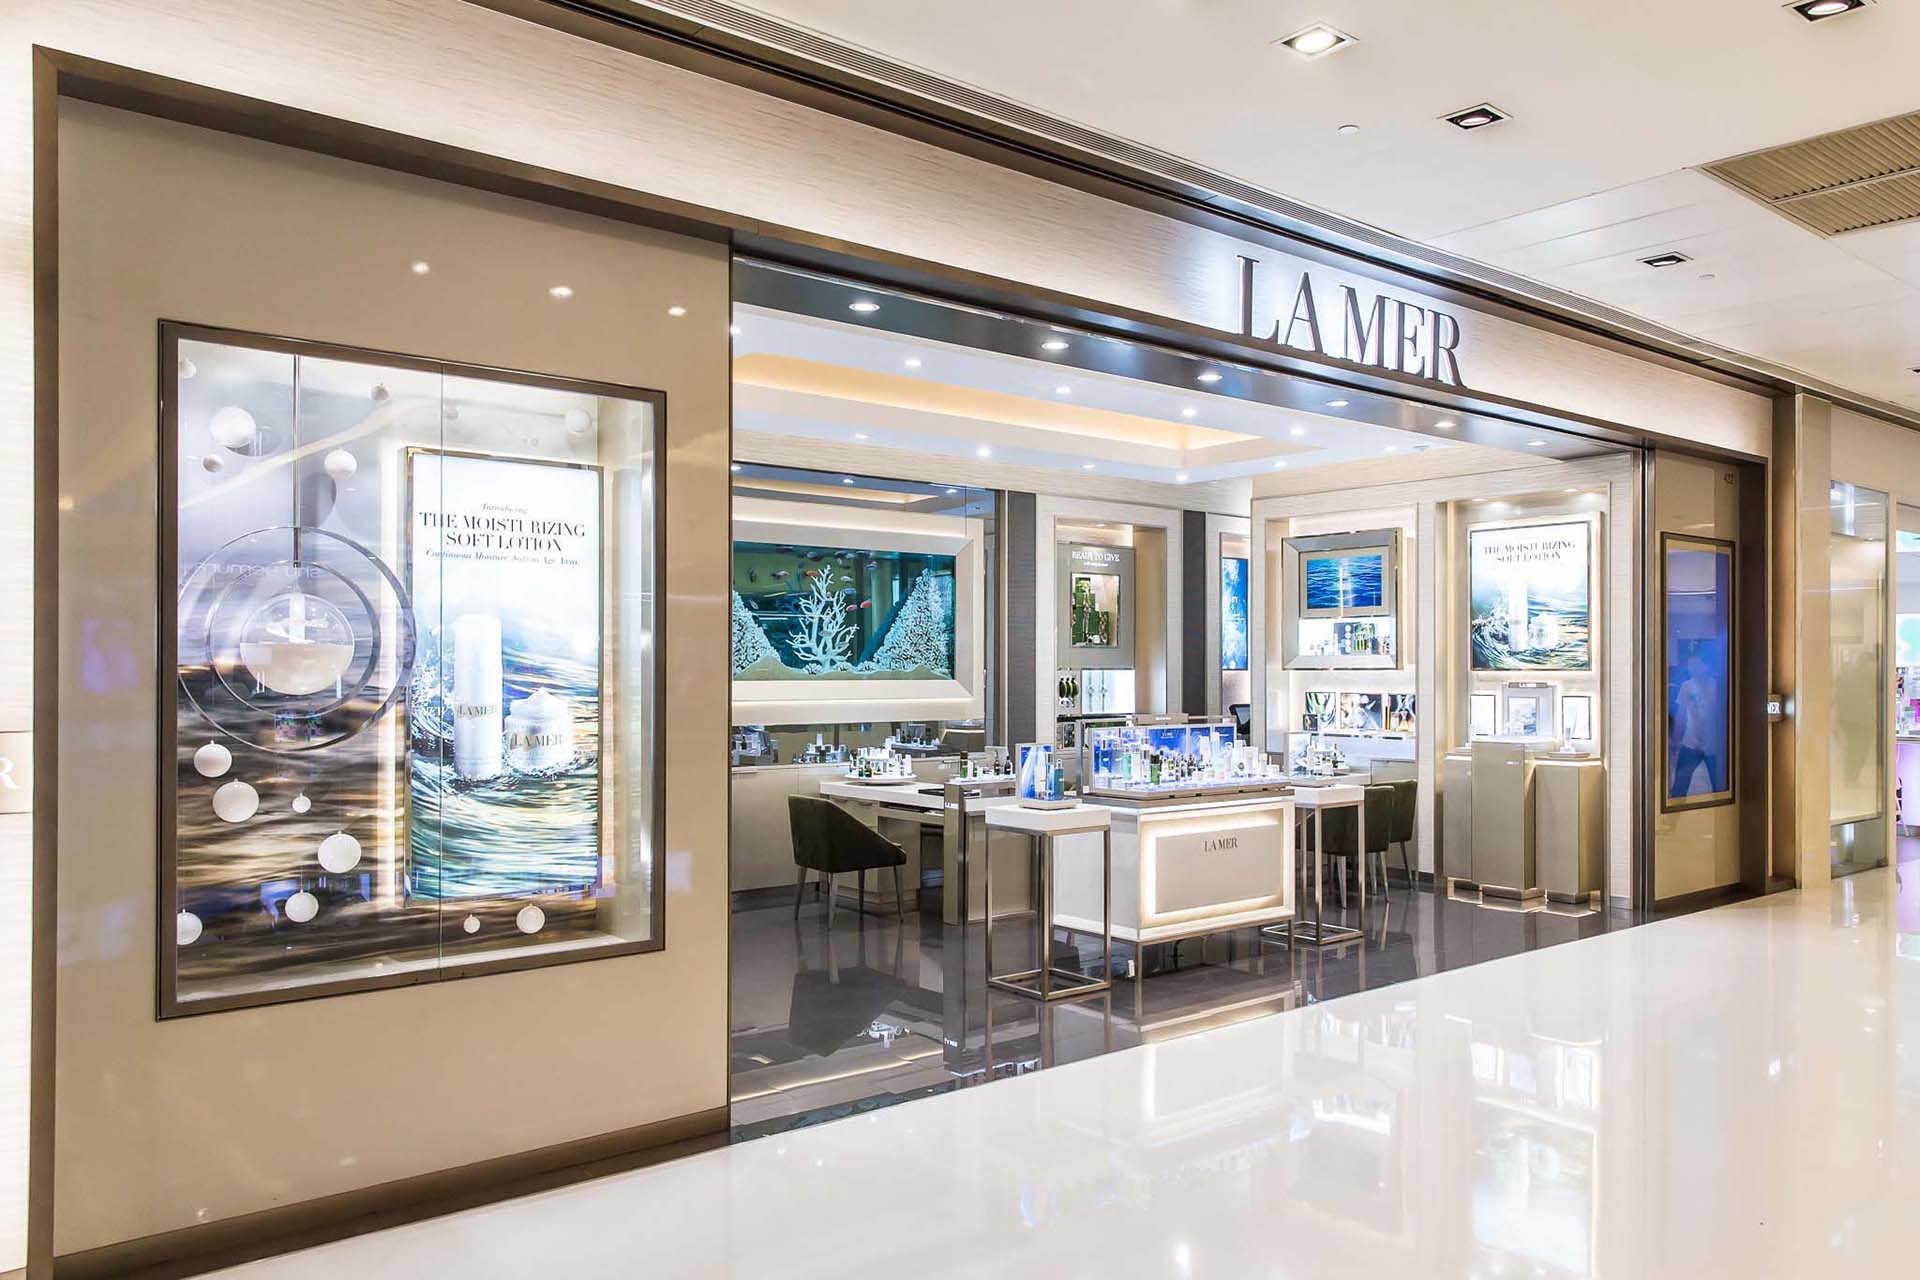 La Mer New Town Plaza Shatin Hong Kong Store Design Development and Project Management by Plaap Design